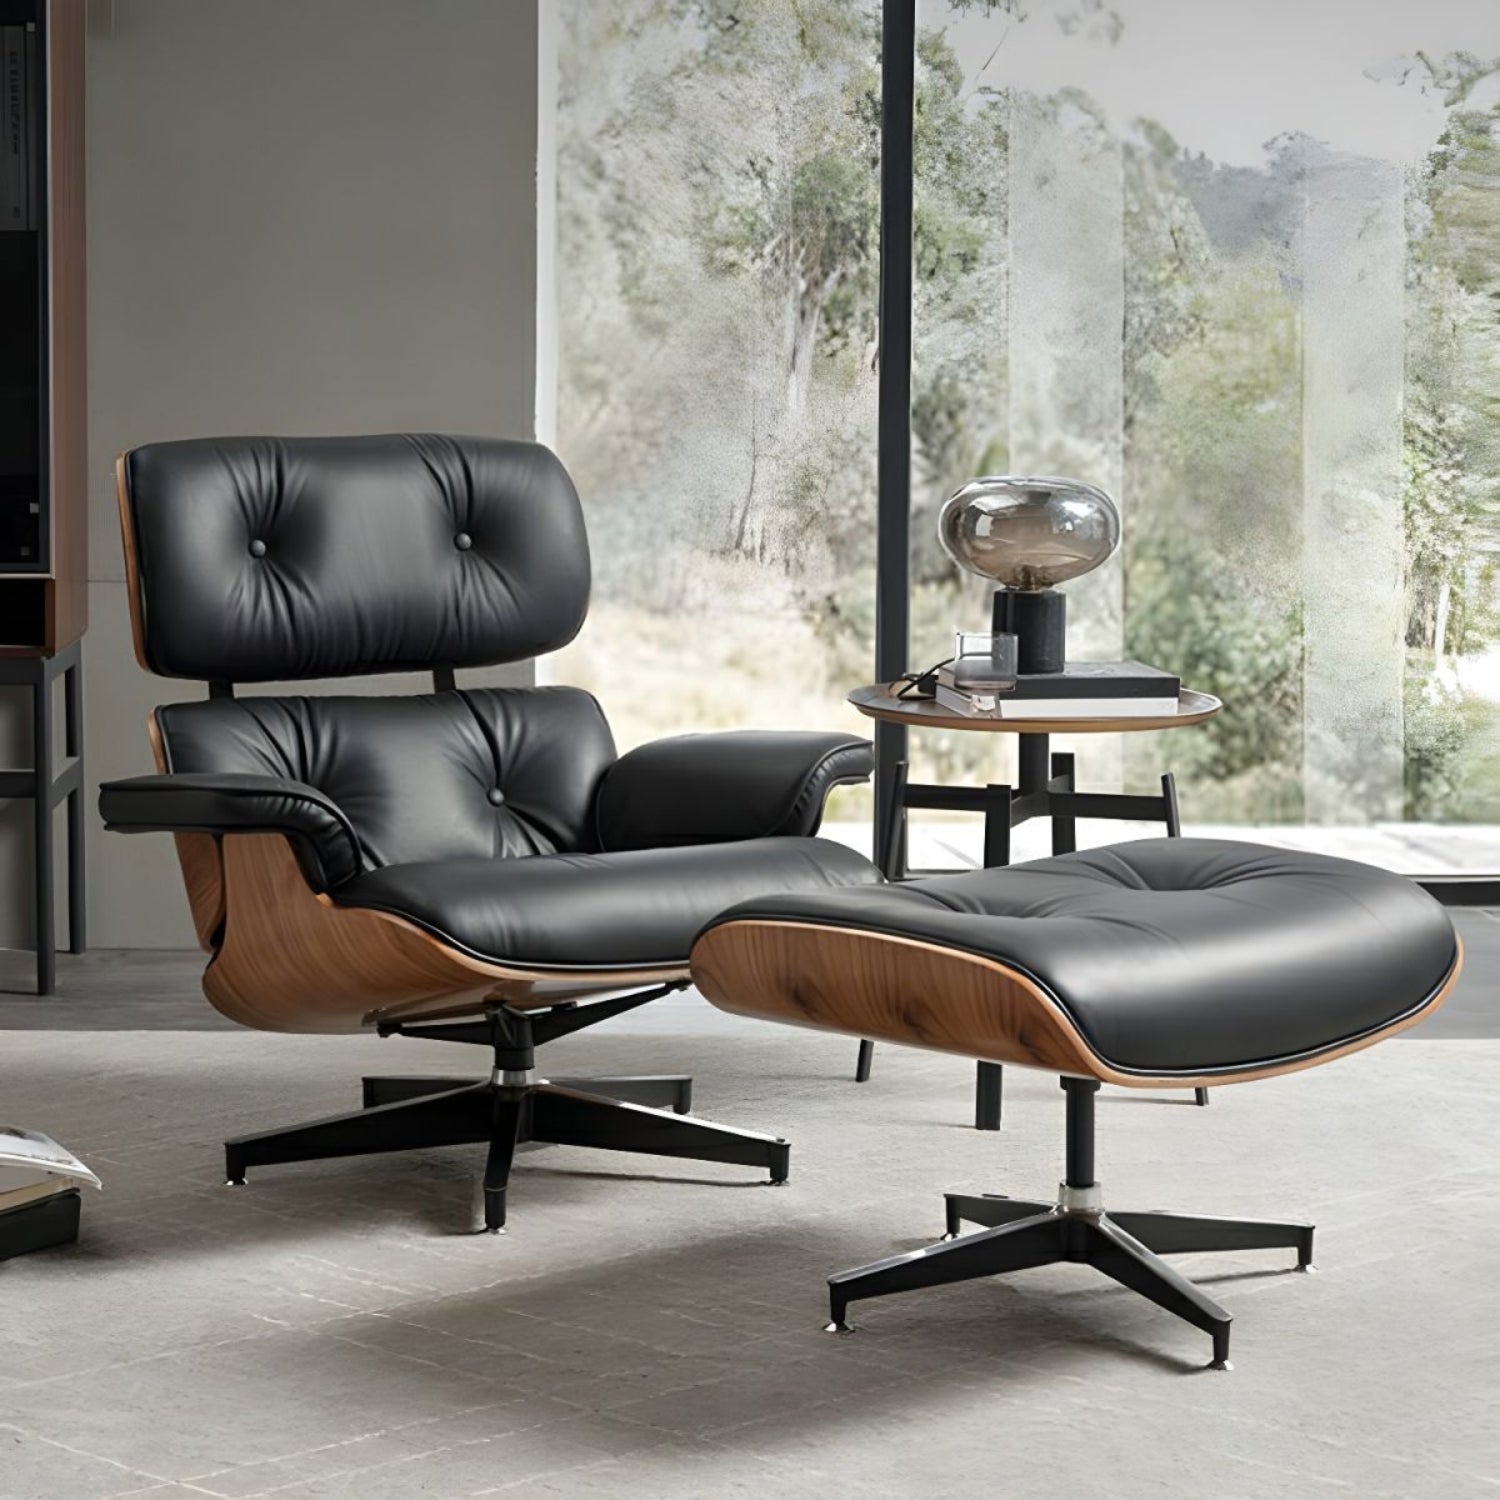 Iconic Eames lounge chair and ottoman, a timeless design for ultimate comfort.